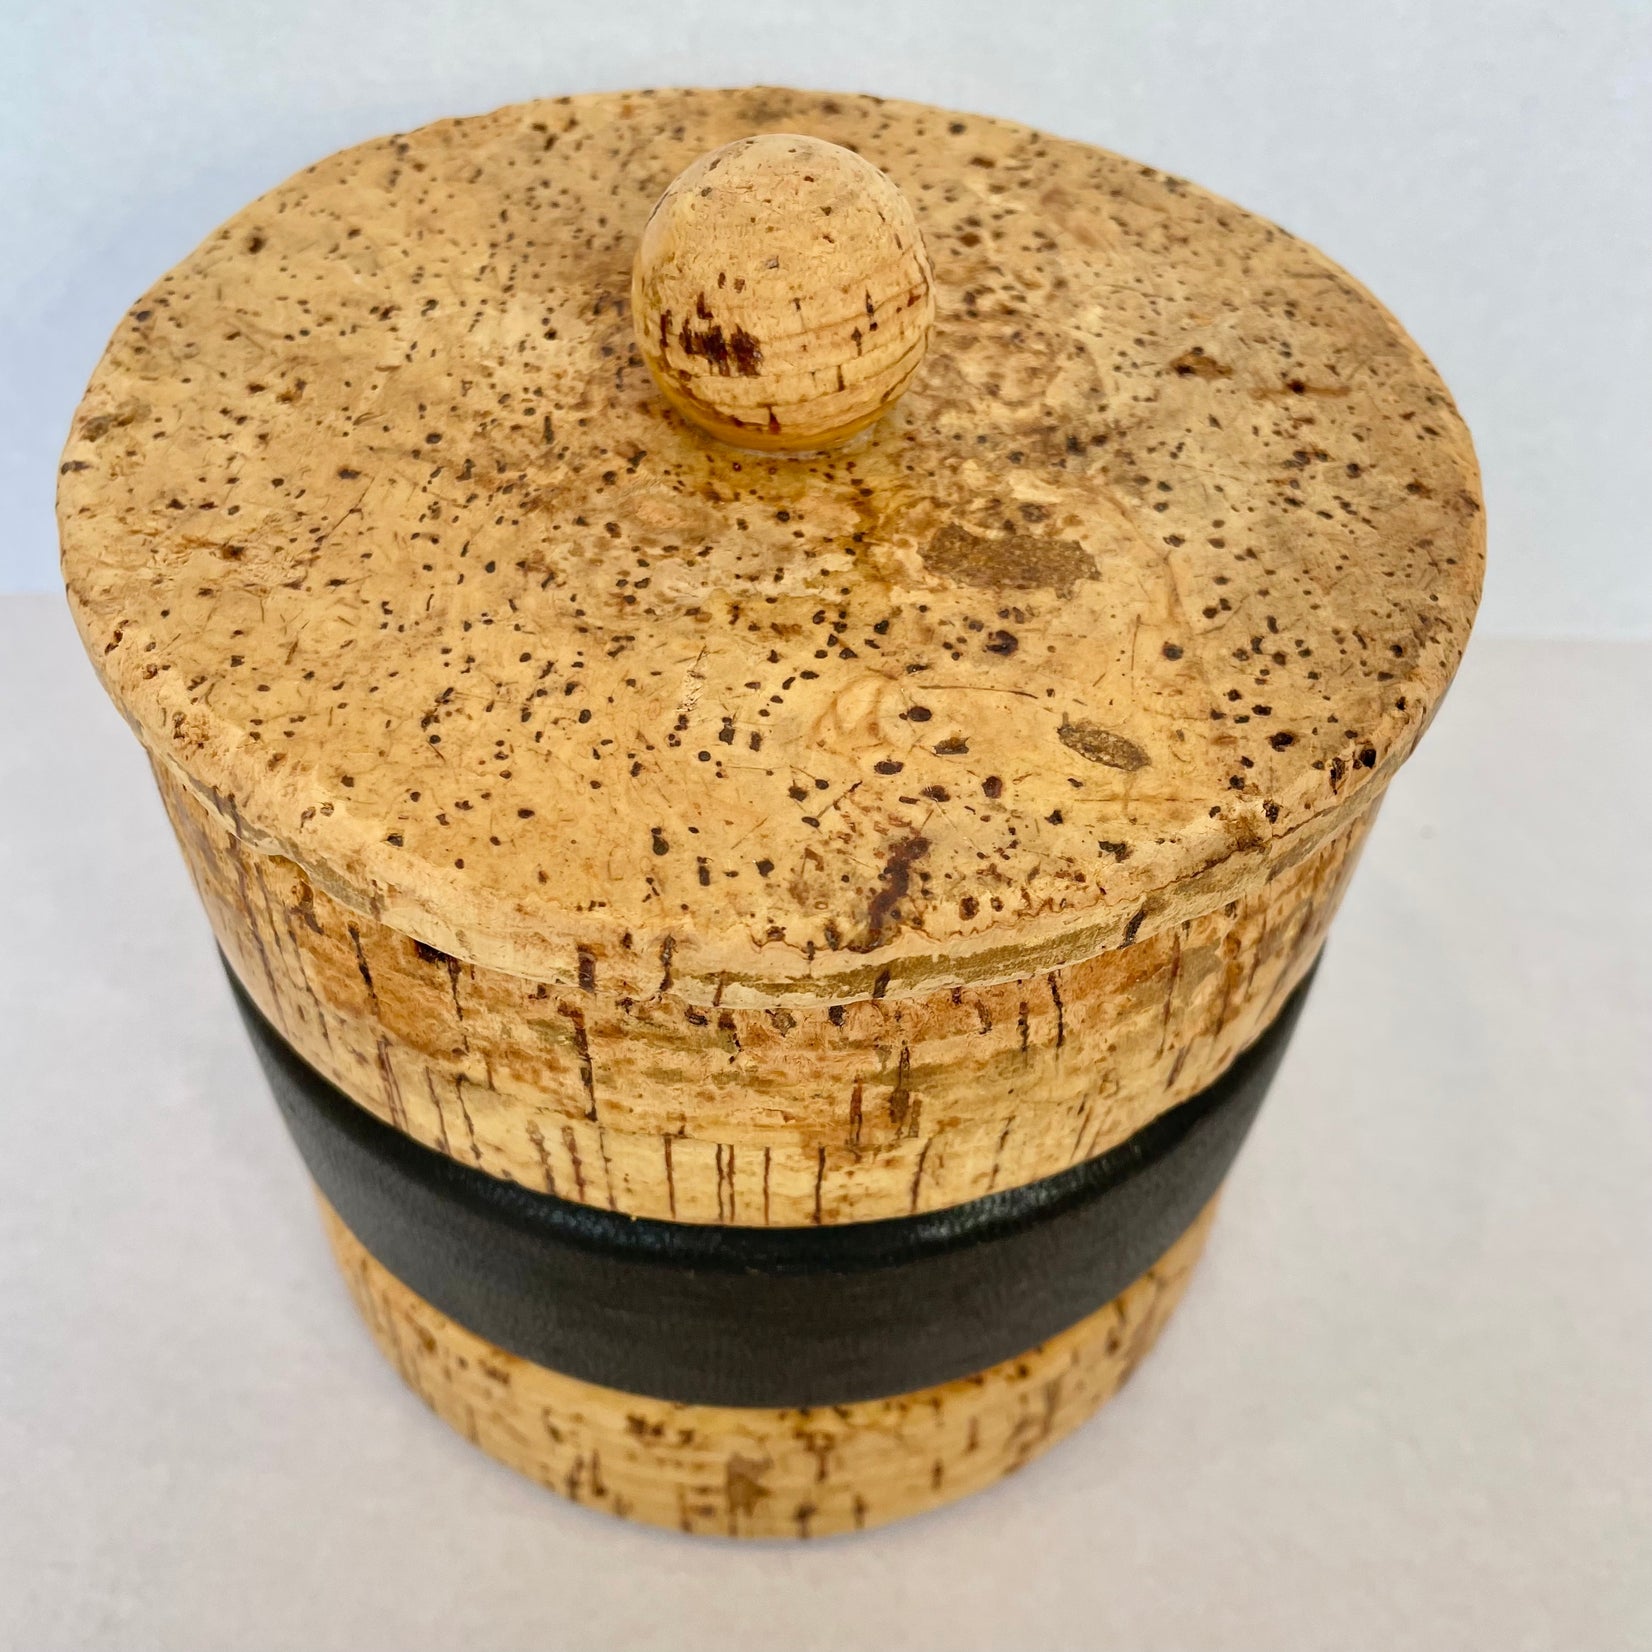 Dunhill Cork and Leather Tobacco Jar, 1950s England